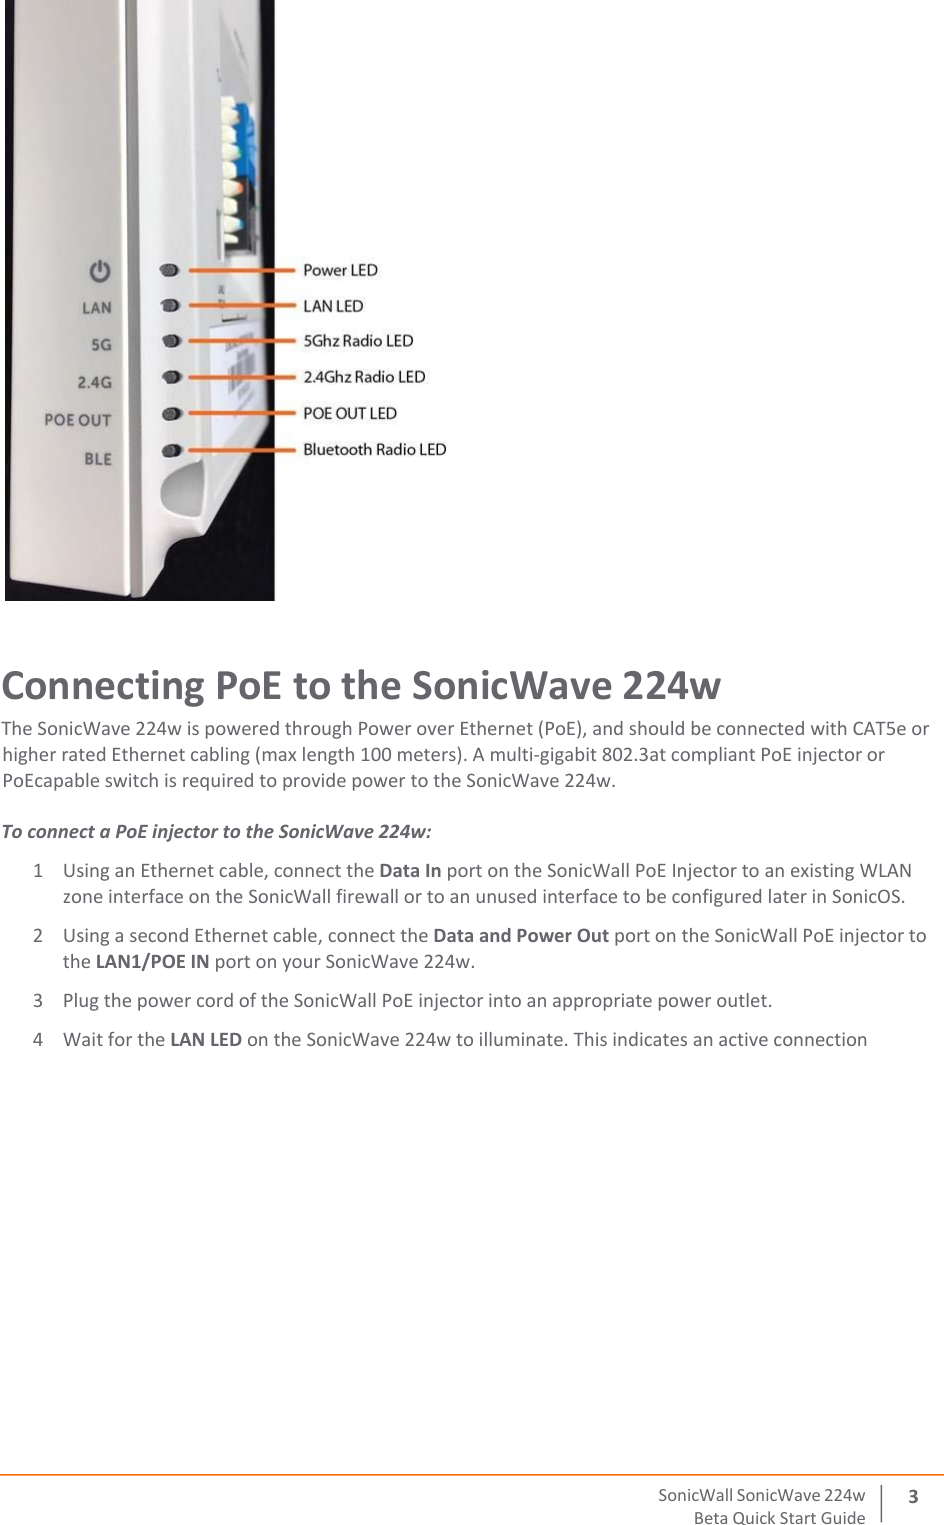  SonicWall   SonicWave   224 w Beta   Quick   Start   Guide 3  Connecting PoE to the SonicWave 224w The SonicWave 224w is powered through Power over Ethernet (PoE), and should be connected with CAT5e or higher rated Ethernet cabling (max length 100 meters). A multi‐gigabit 802.3at compliant PoE injector or PoEcapable switch is required to provide power to the SonicWave 224w.  To connect a PoE injector to the SonicWave 224w: 1 Using an Ethernet cable, connect the Data In port on the SonicWall PoE Injector to an existing WLAN zone interface on the SonicWall firewall or to an unused interface to be configured later in SonicOS. 2 Using a second Ethernet cable, connect the Data and Power Out port on the SonicWall PoE injector to the LAN1/POE IN port on your SonicWave 224w. 3 Plug the power cord of the SonicWall PoE injector into an appropriate power outlet. 4 Wait for the LAN LED on the SonicWave 224w to illuminate. This indicates an active connection     